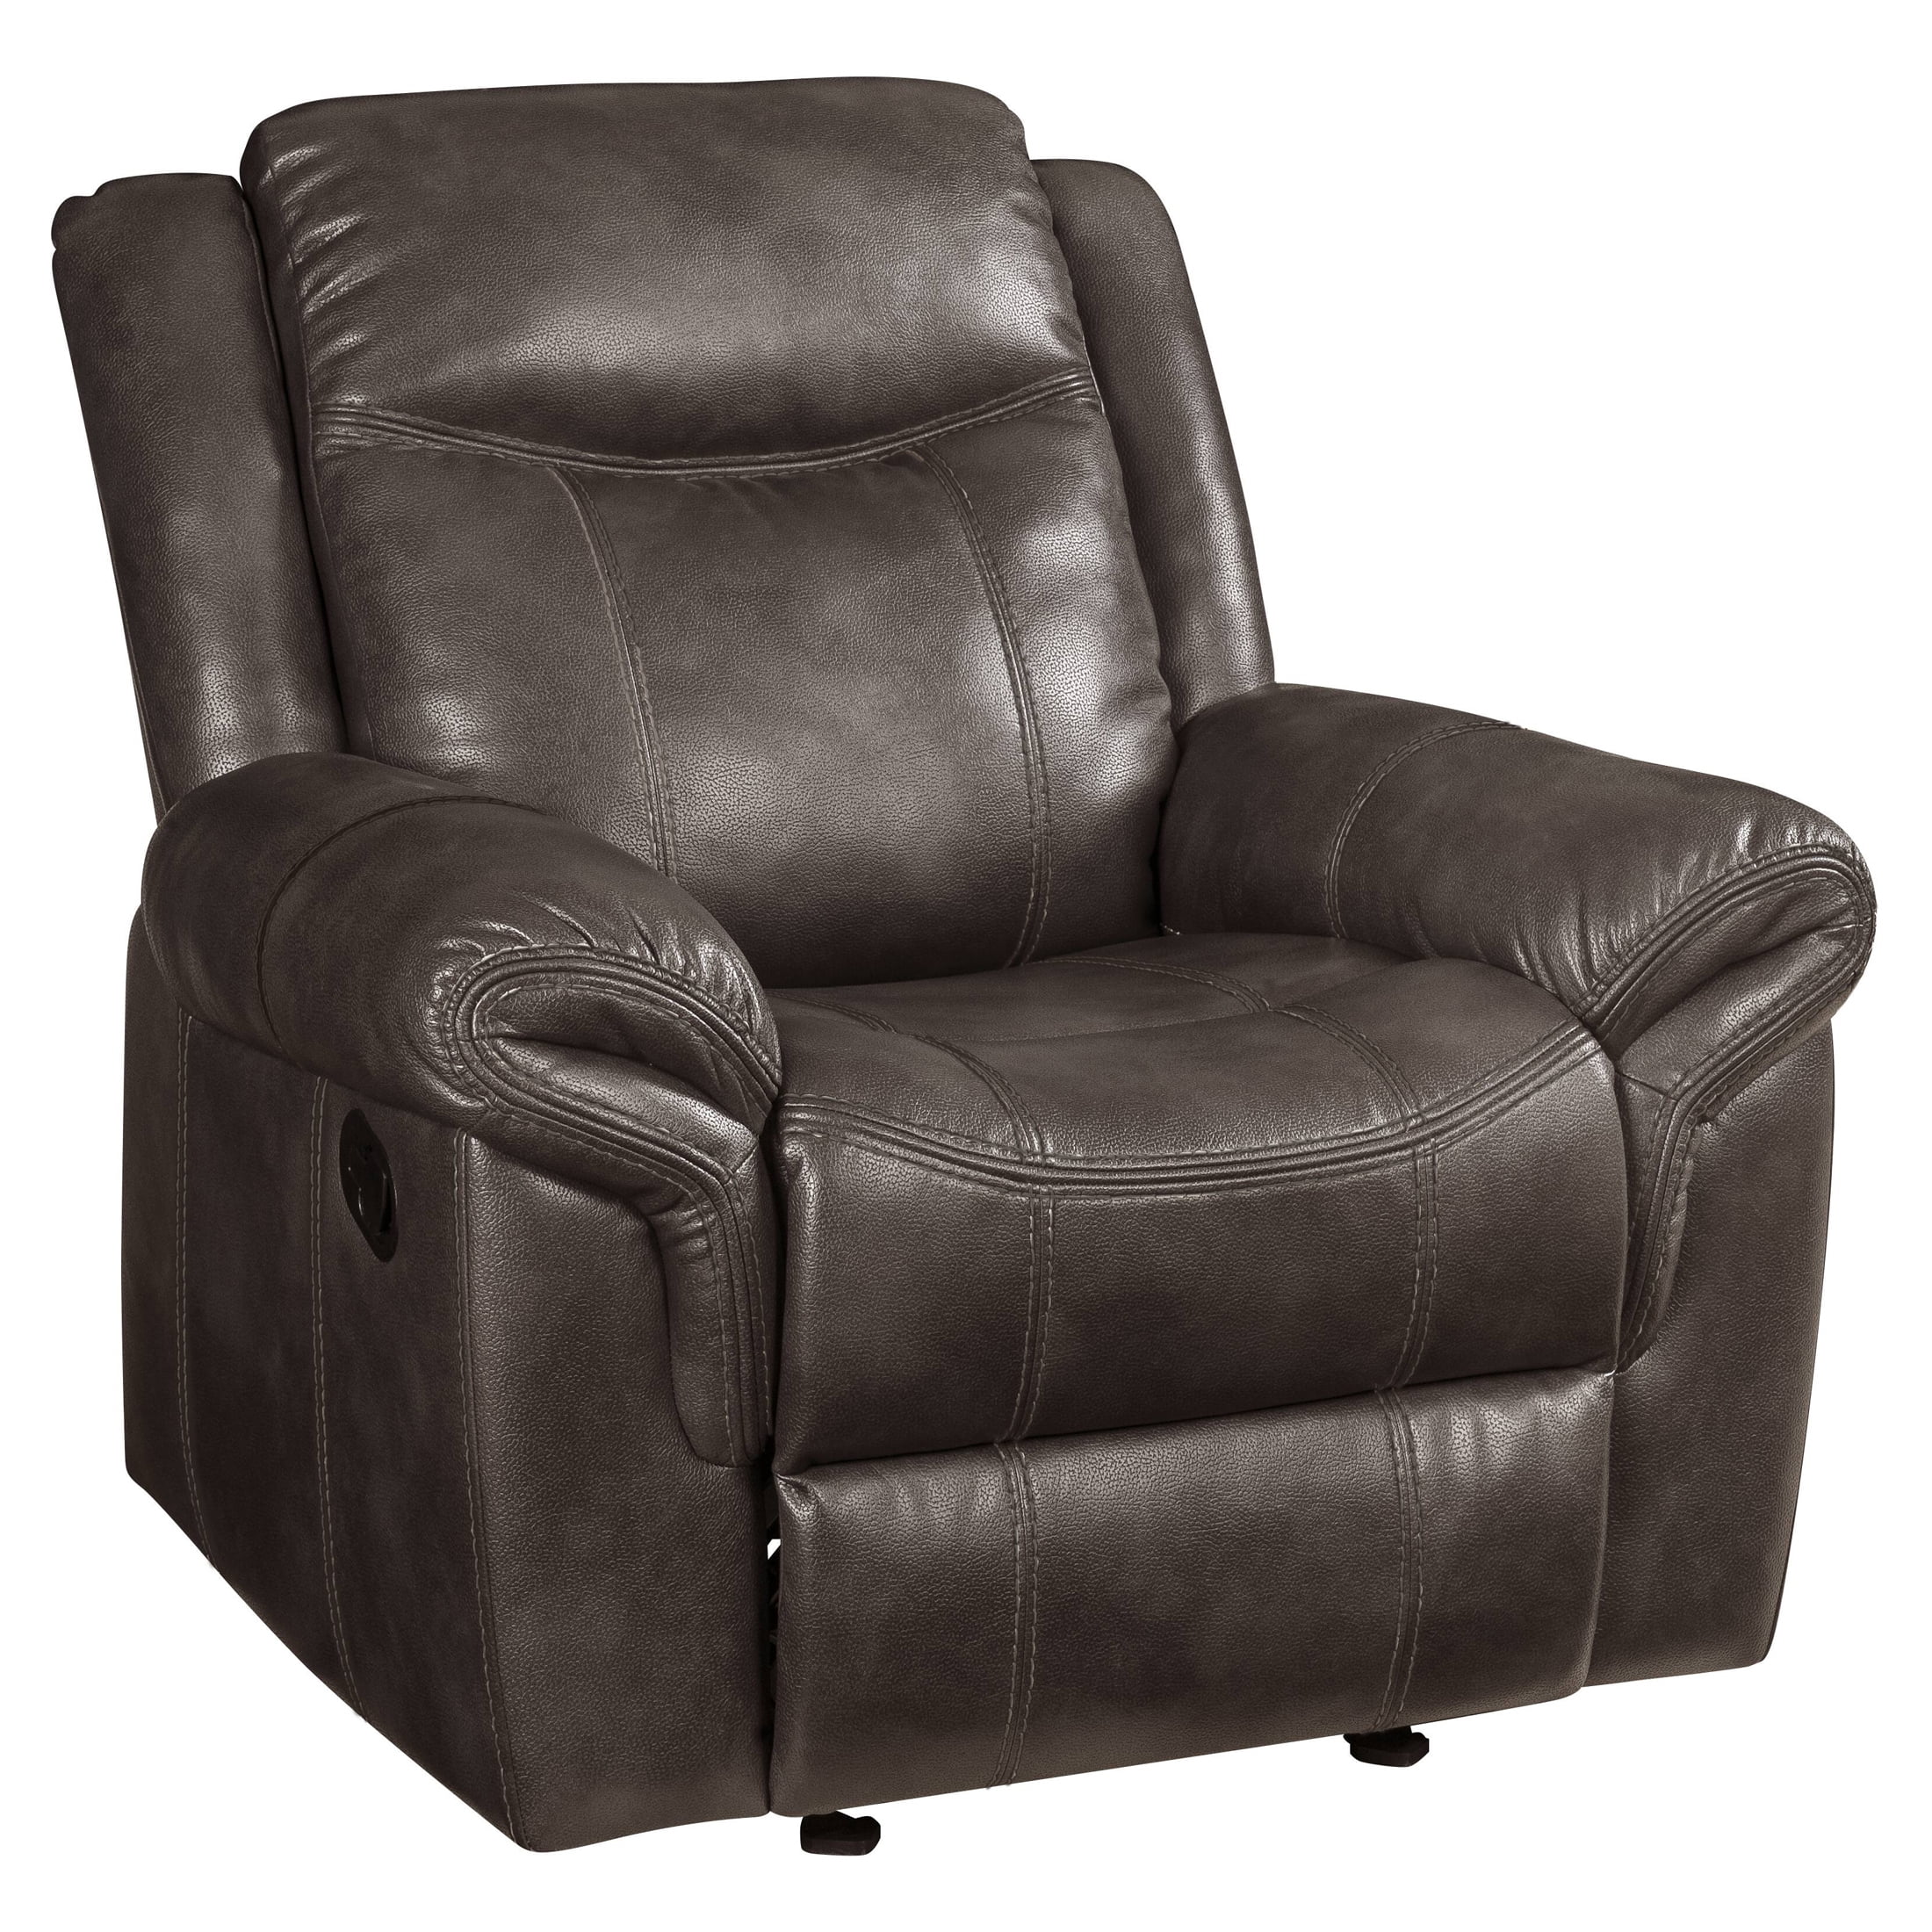 Picture of Acme Furniture LV00656 40 x 38 x 40 in. Lydia Glider Recliner, Brown Leather Aire